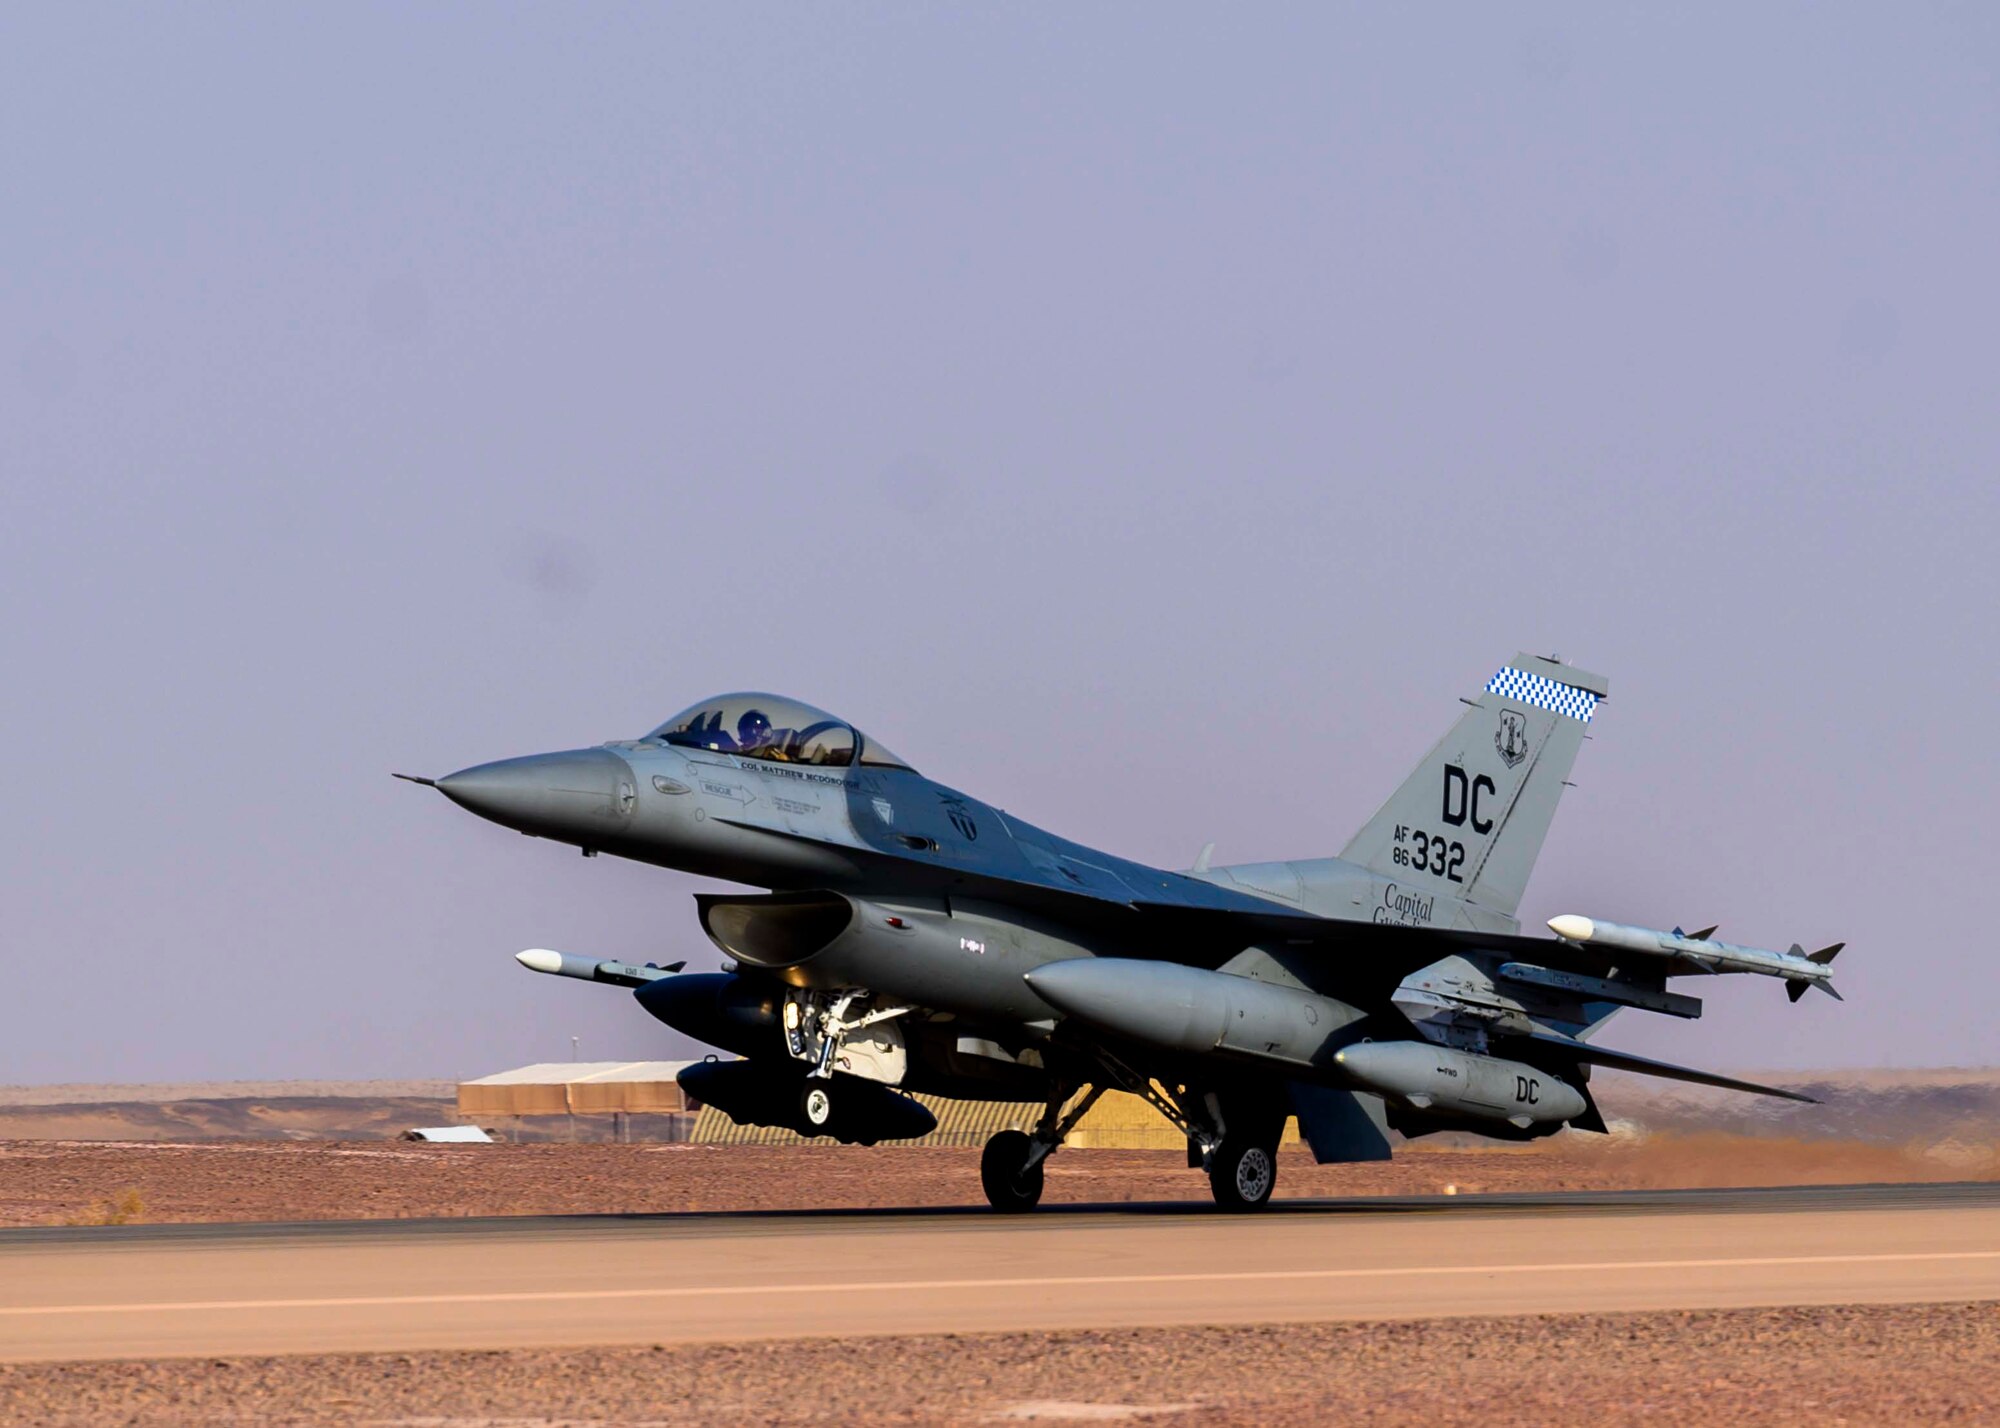 A U.S. Air Force F-16C Fighting Falcon from District of Columbia Air National Guard’s 113th Wing, known as the “Capital Guardians,”  lands on the flight line at Prince Sultan Air Base, Kingdom of Saudi Arabia, July 9, 2021. The wing deployed a contingent of F-16s to PSAB to reinforce the base’s defensive capabilities, provide operational depth, and support U.S. Central Command operations in the region. (U.S. Air Force Photo by Senior Airman Samuel Earick)